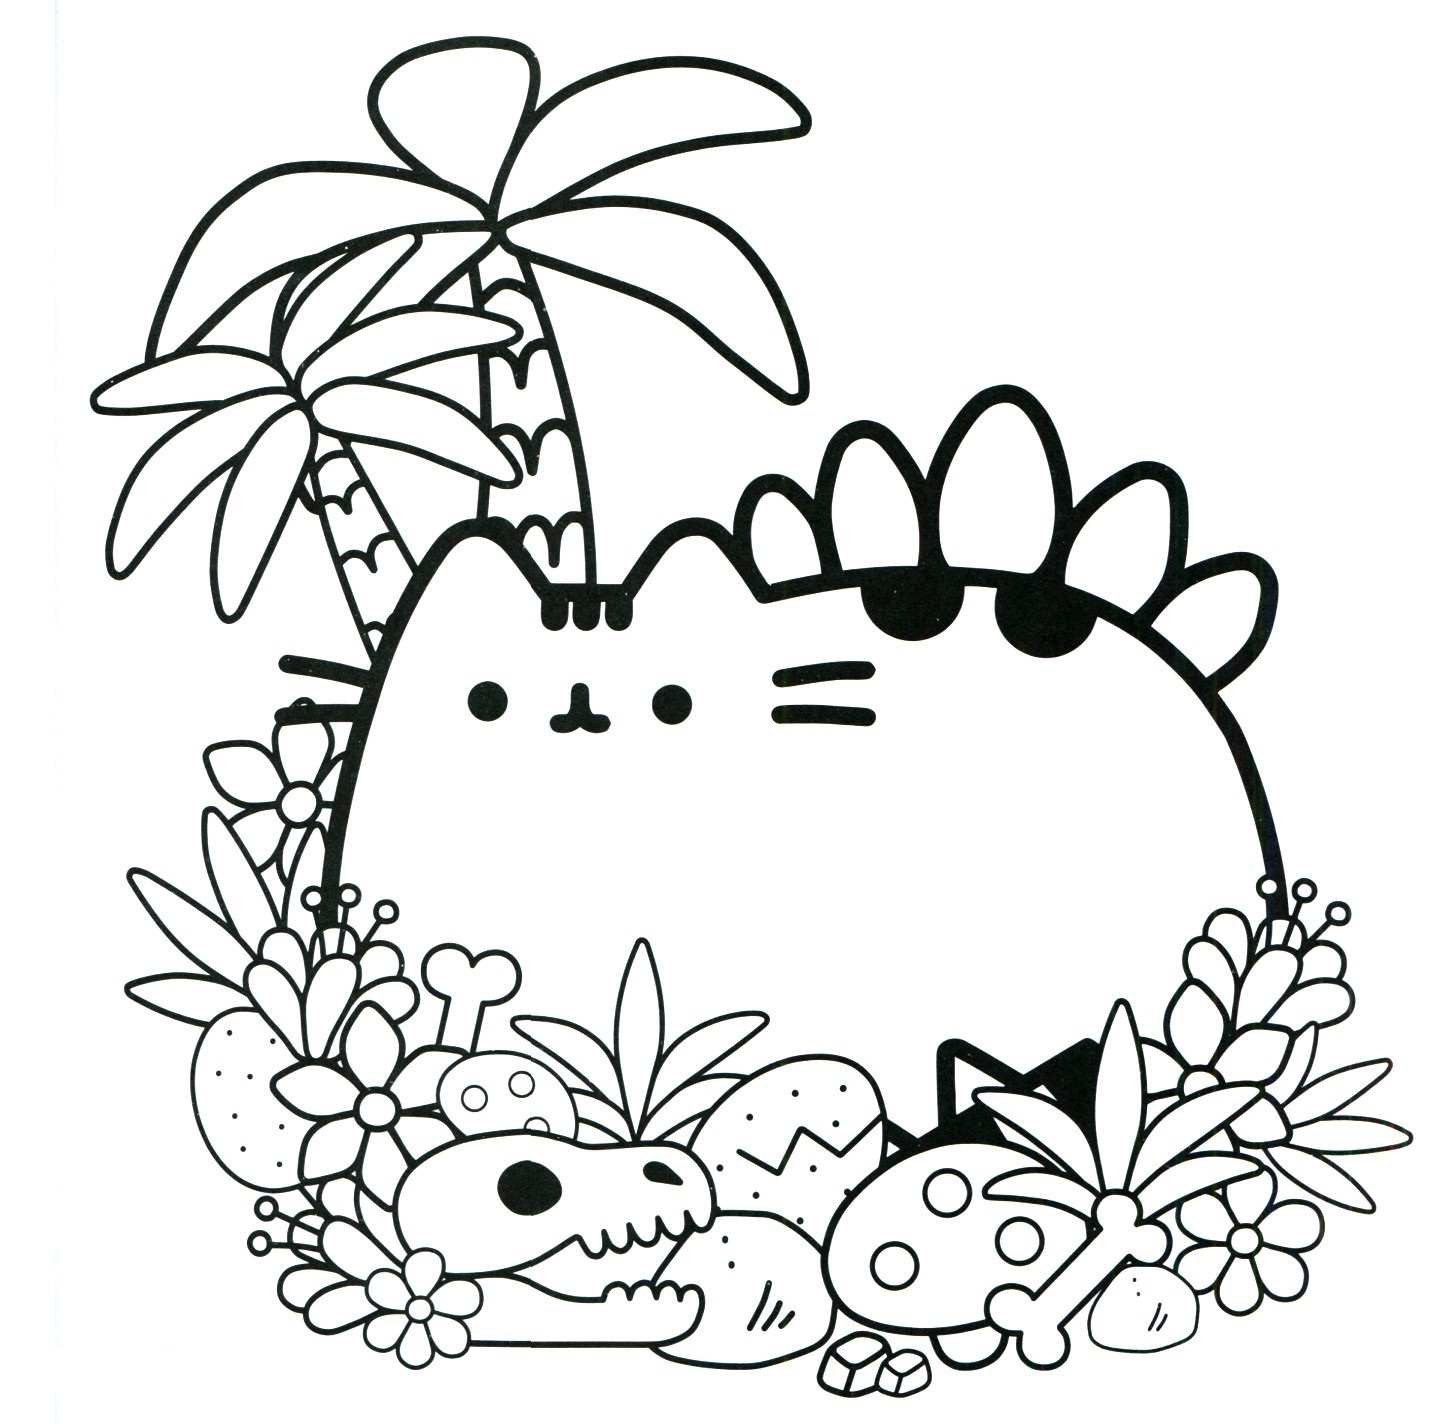 Download Cute Pusheen Coloring Page - Free Printable Coloring Pages ...